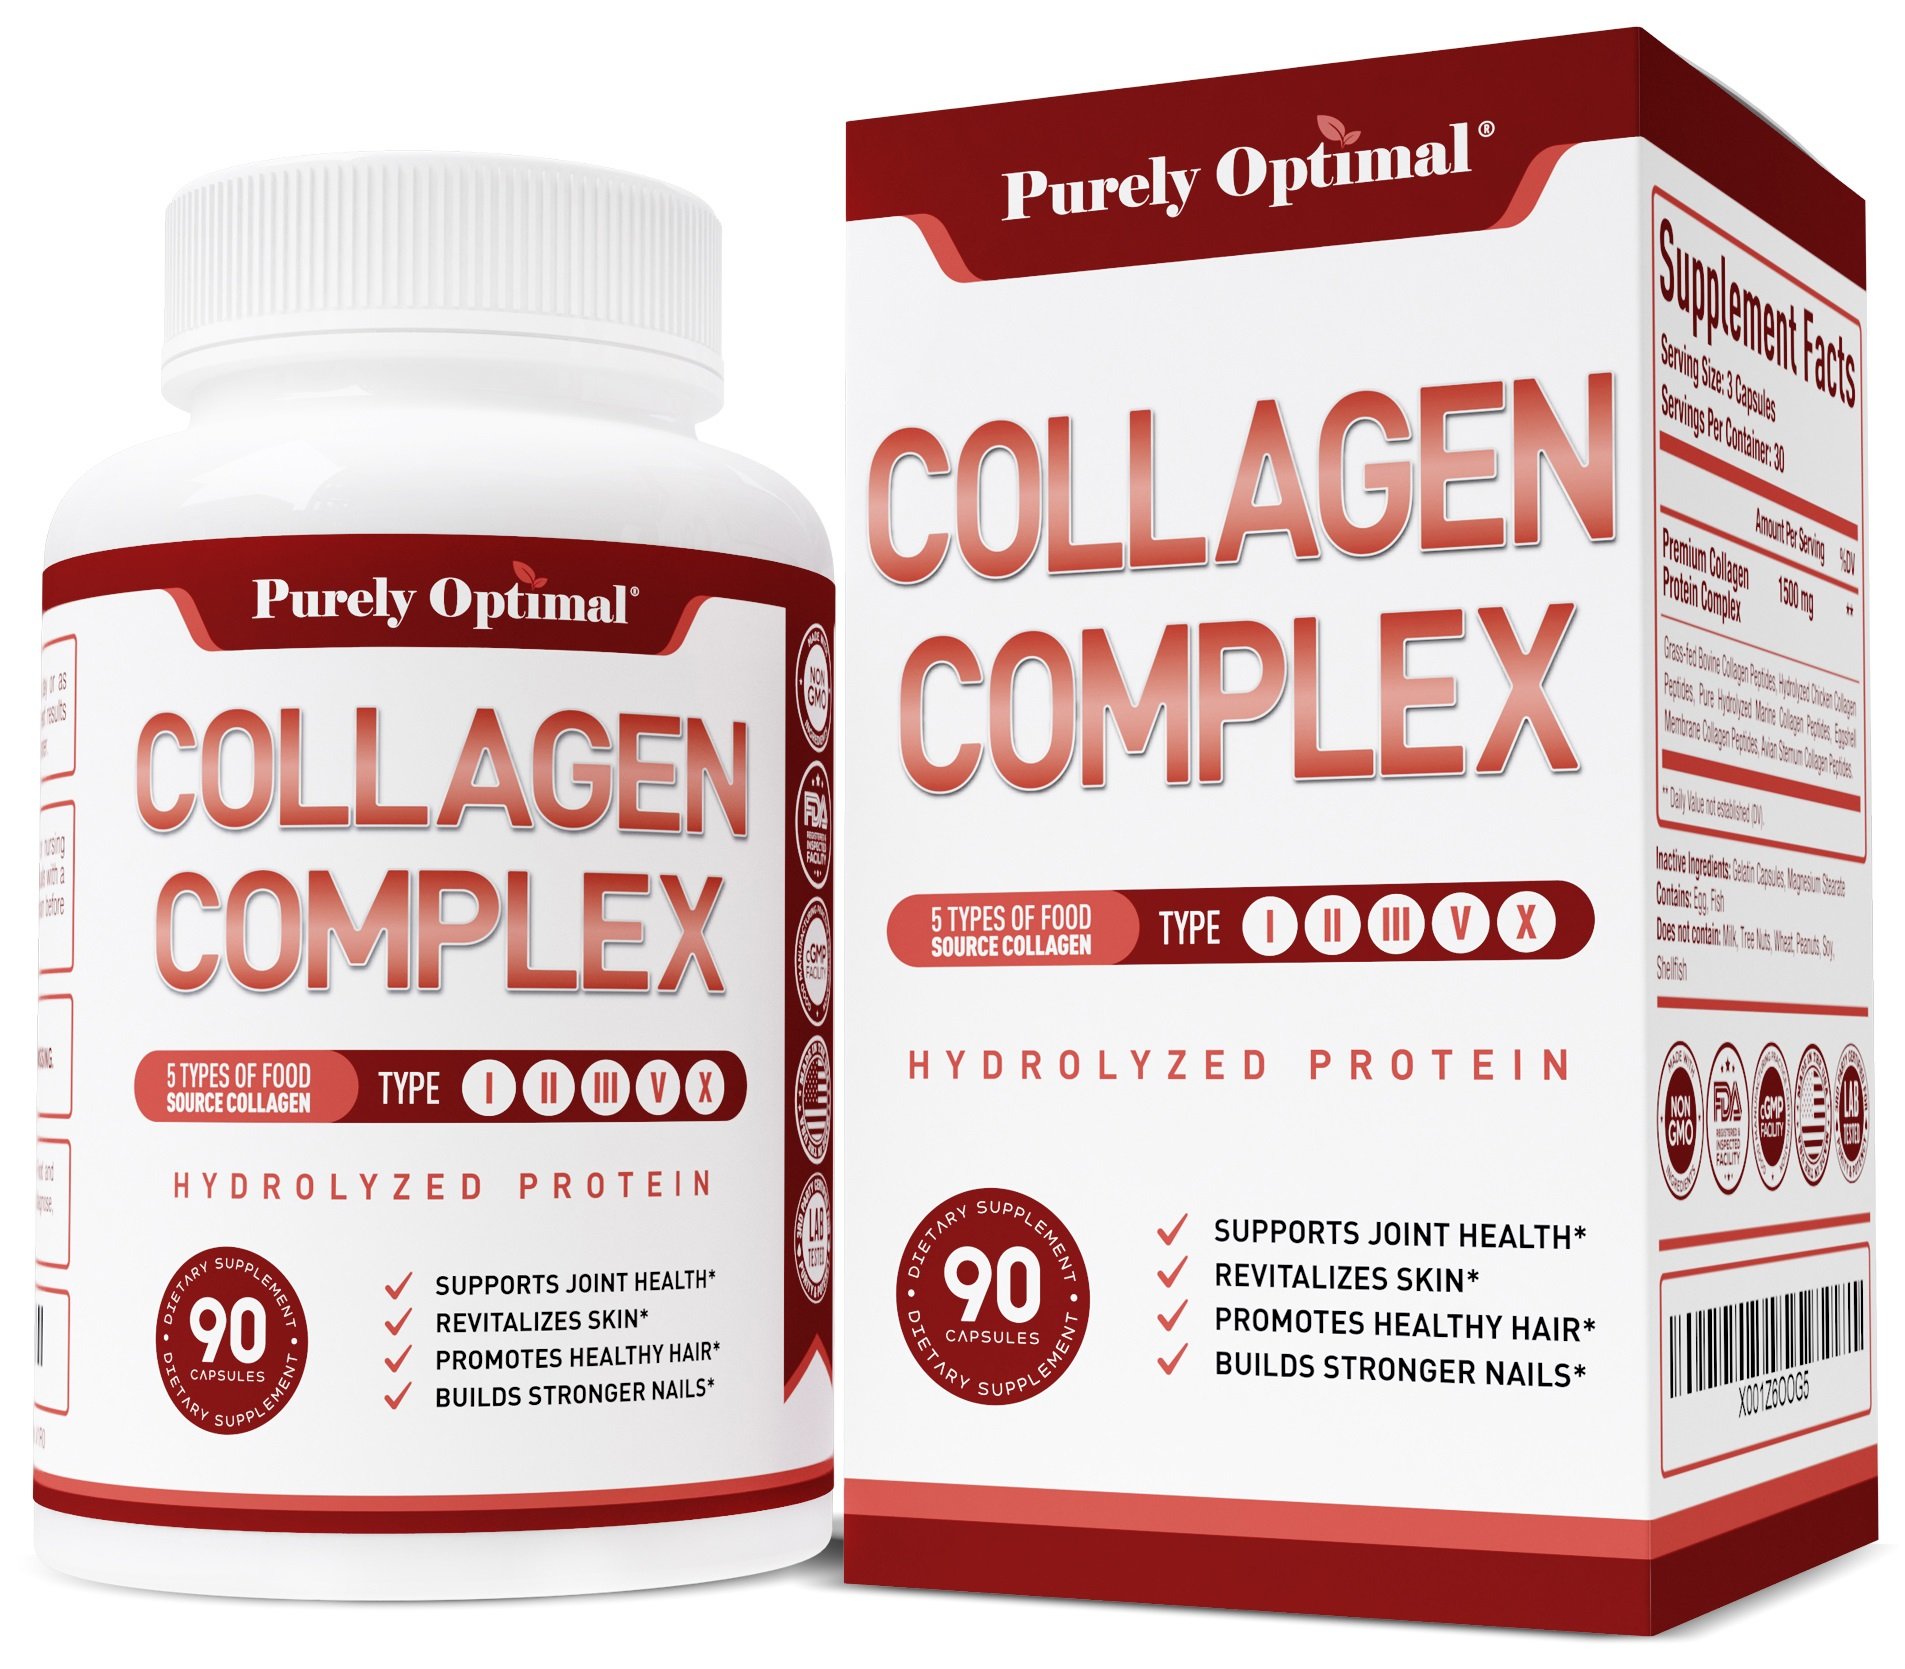 Purely Optimal Collagen Complex Review Get the Best Hydrolyzed